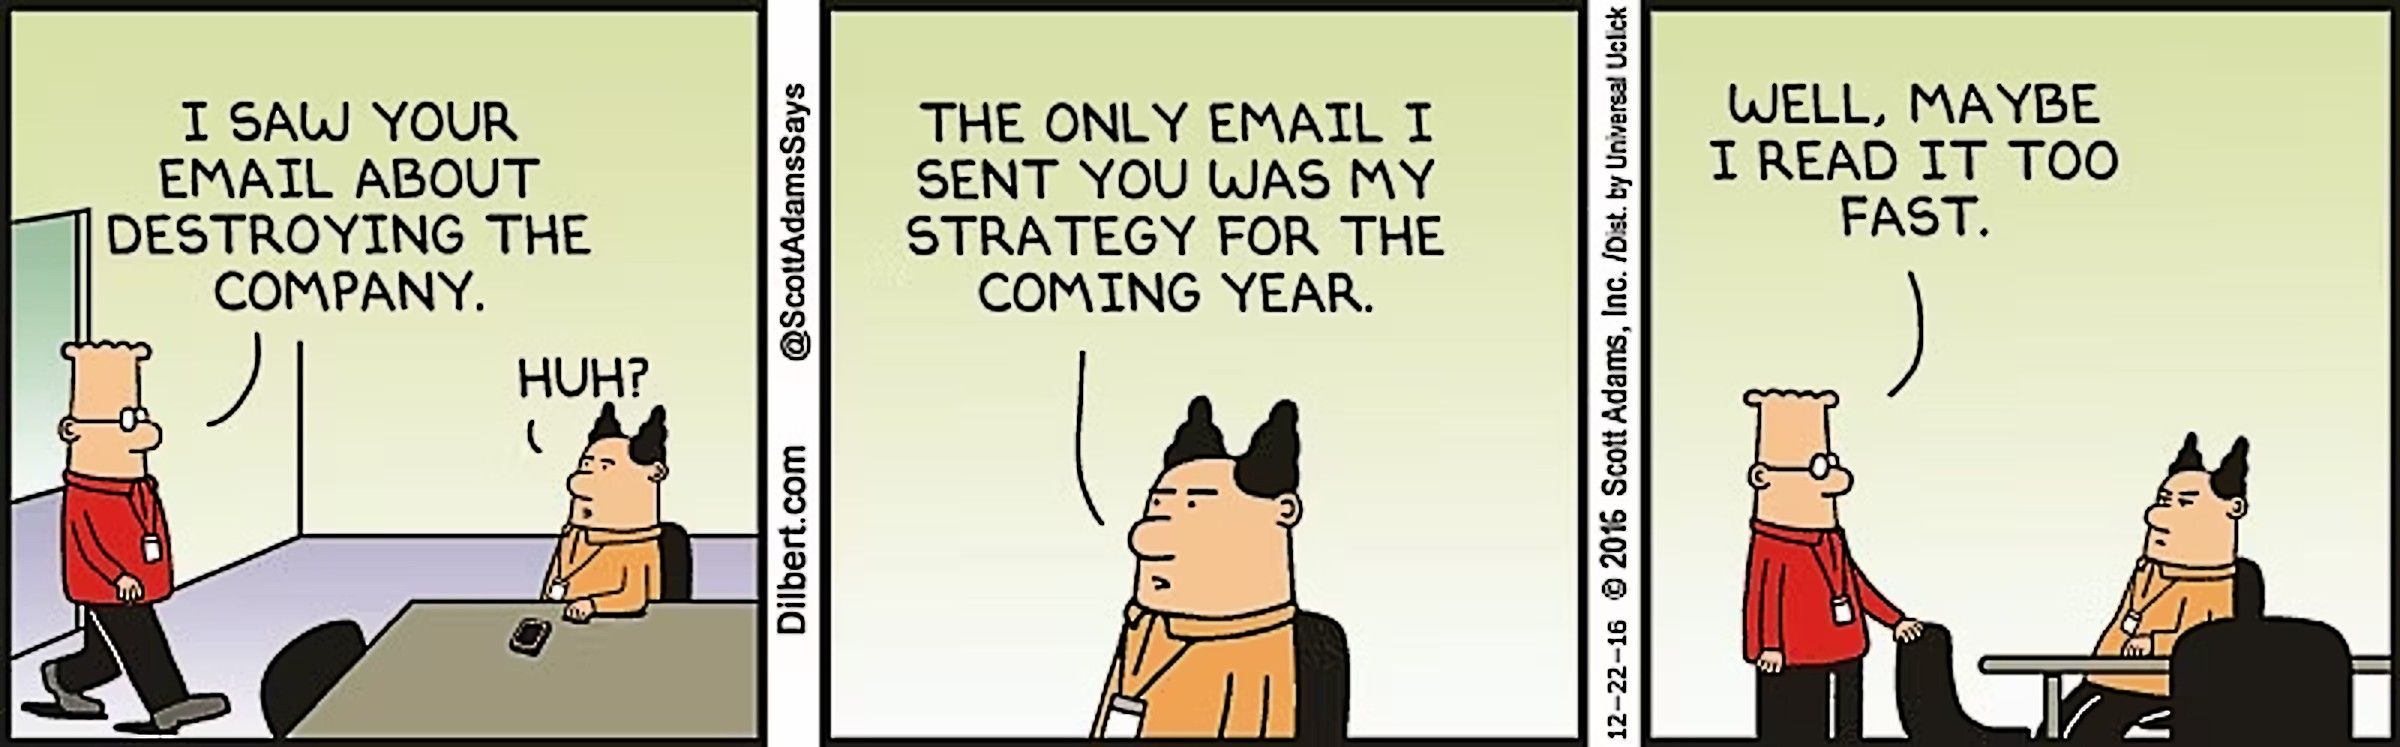 Dilbert accidentally describes his boss's email as a "strategy to destroy the company"